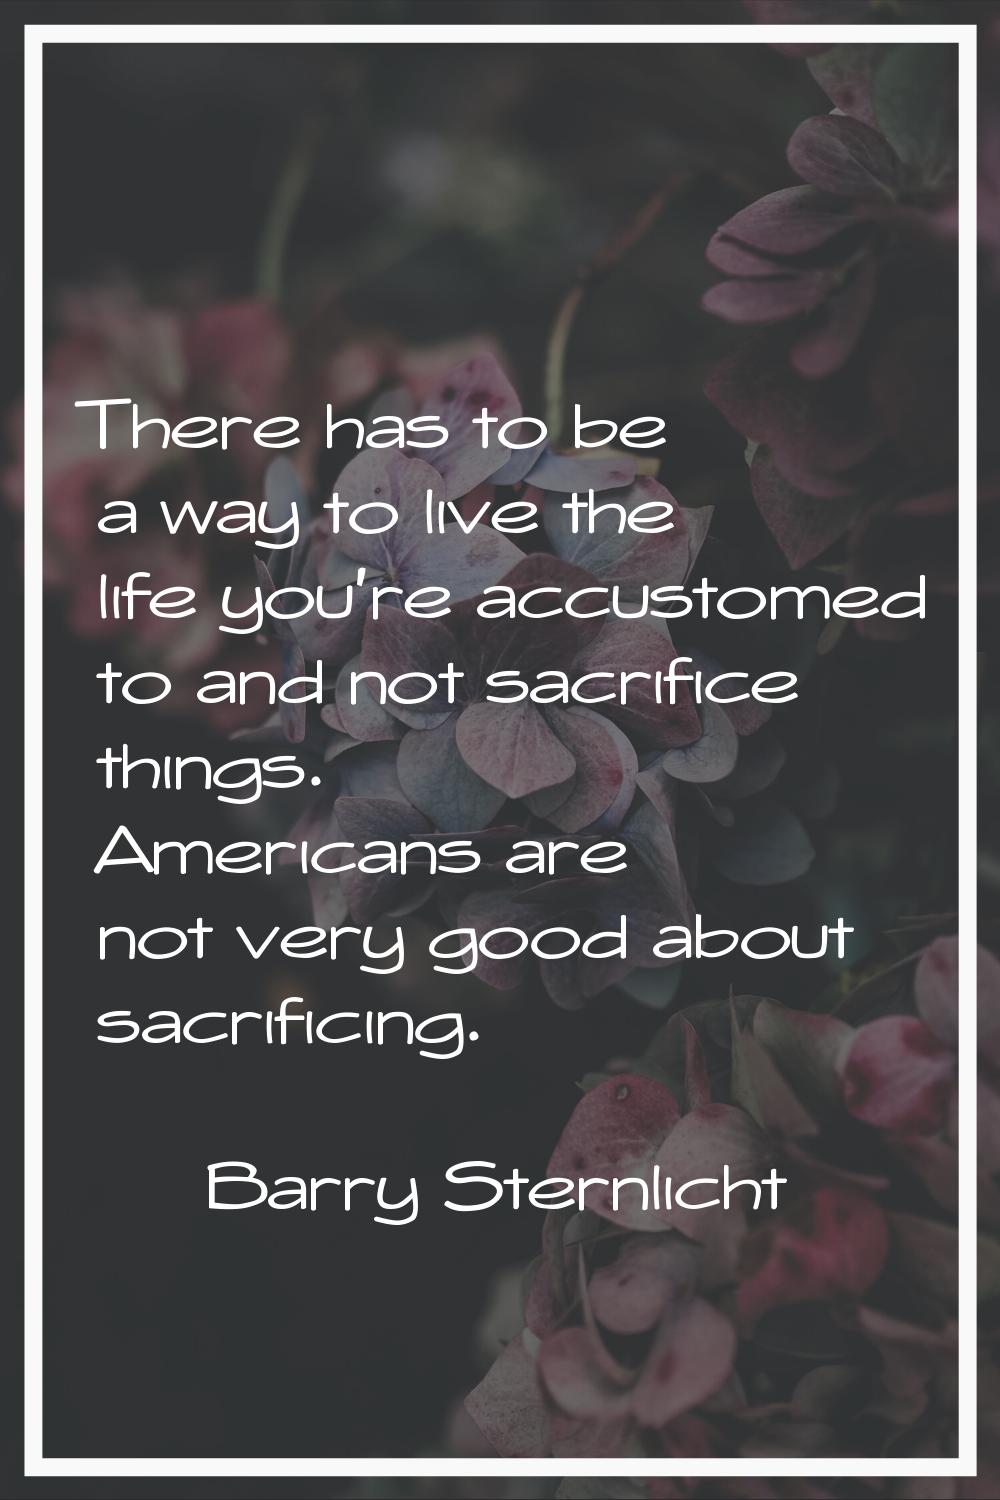 There has to be a way to live the life you're accustomed to and not sacrifice things. Americans are